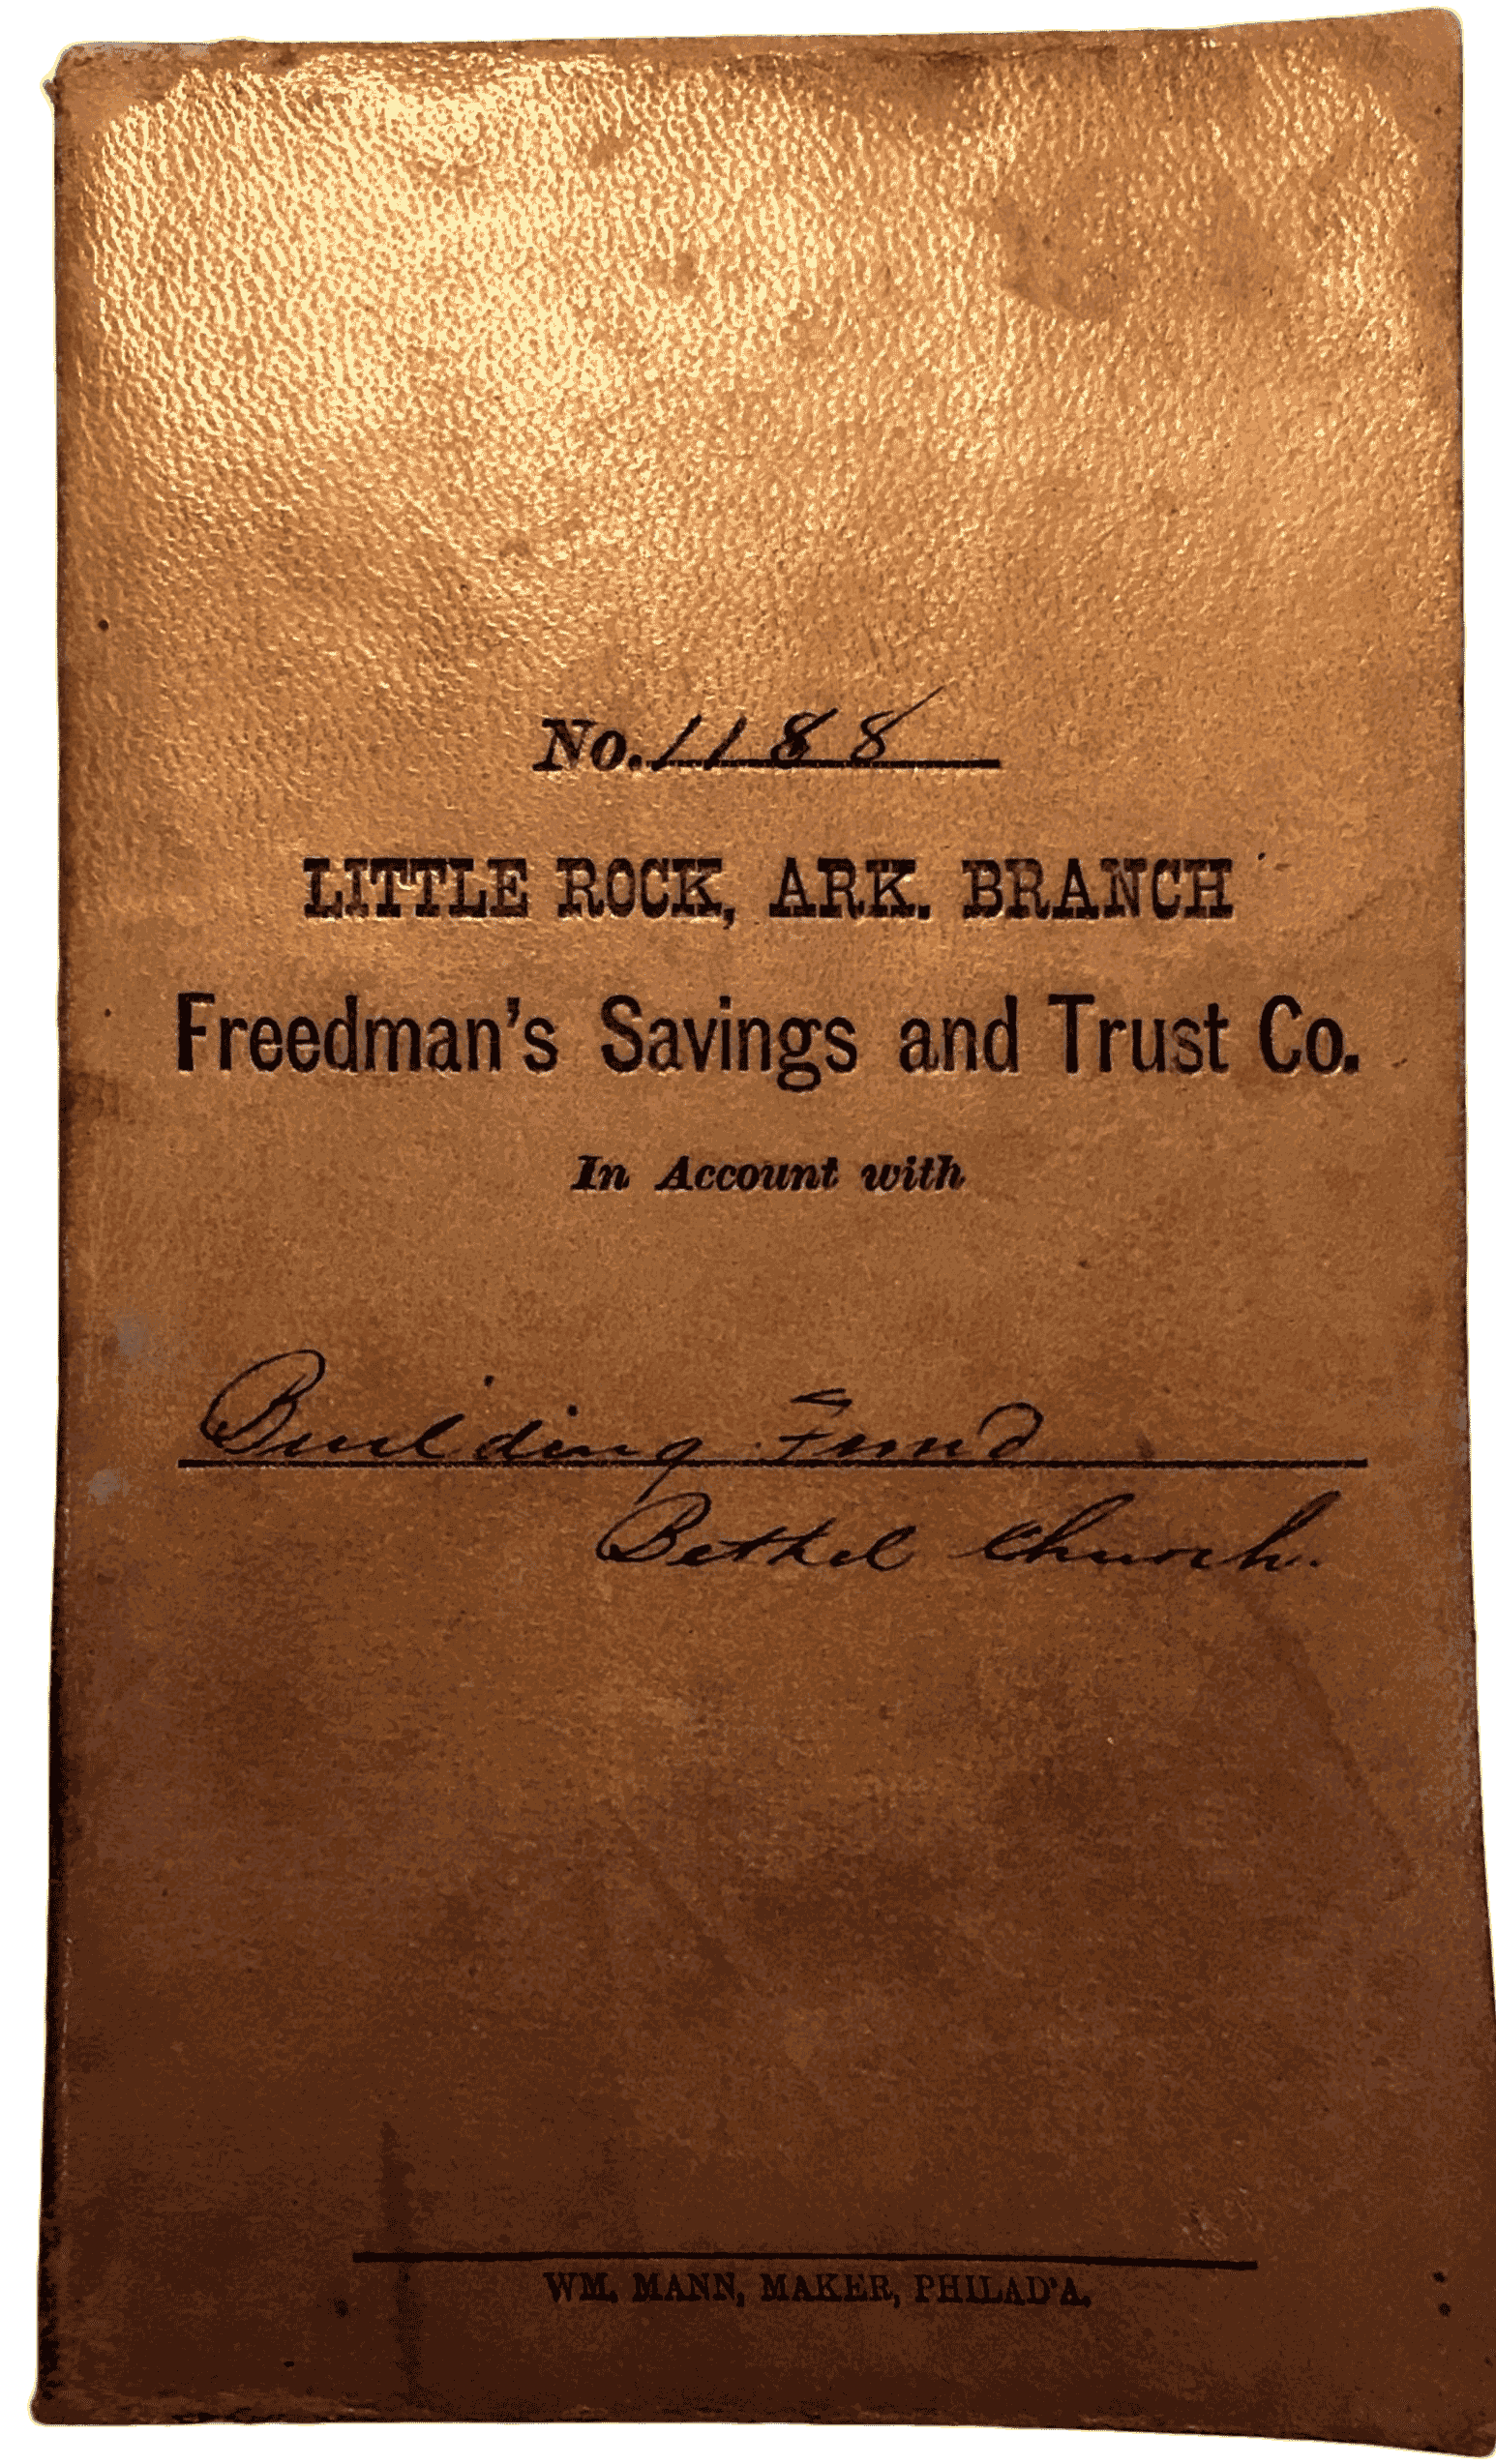 A brown leather covered Freedman’s Savings Bank deposit book from the Little Rock, Arc Branch.